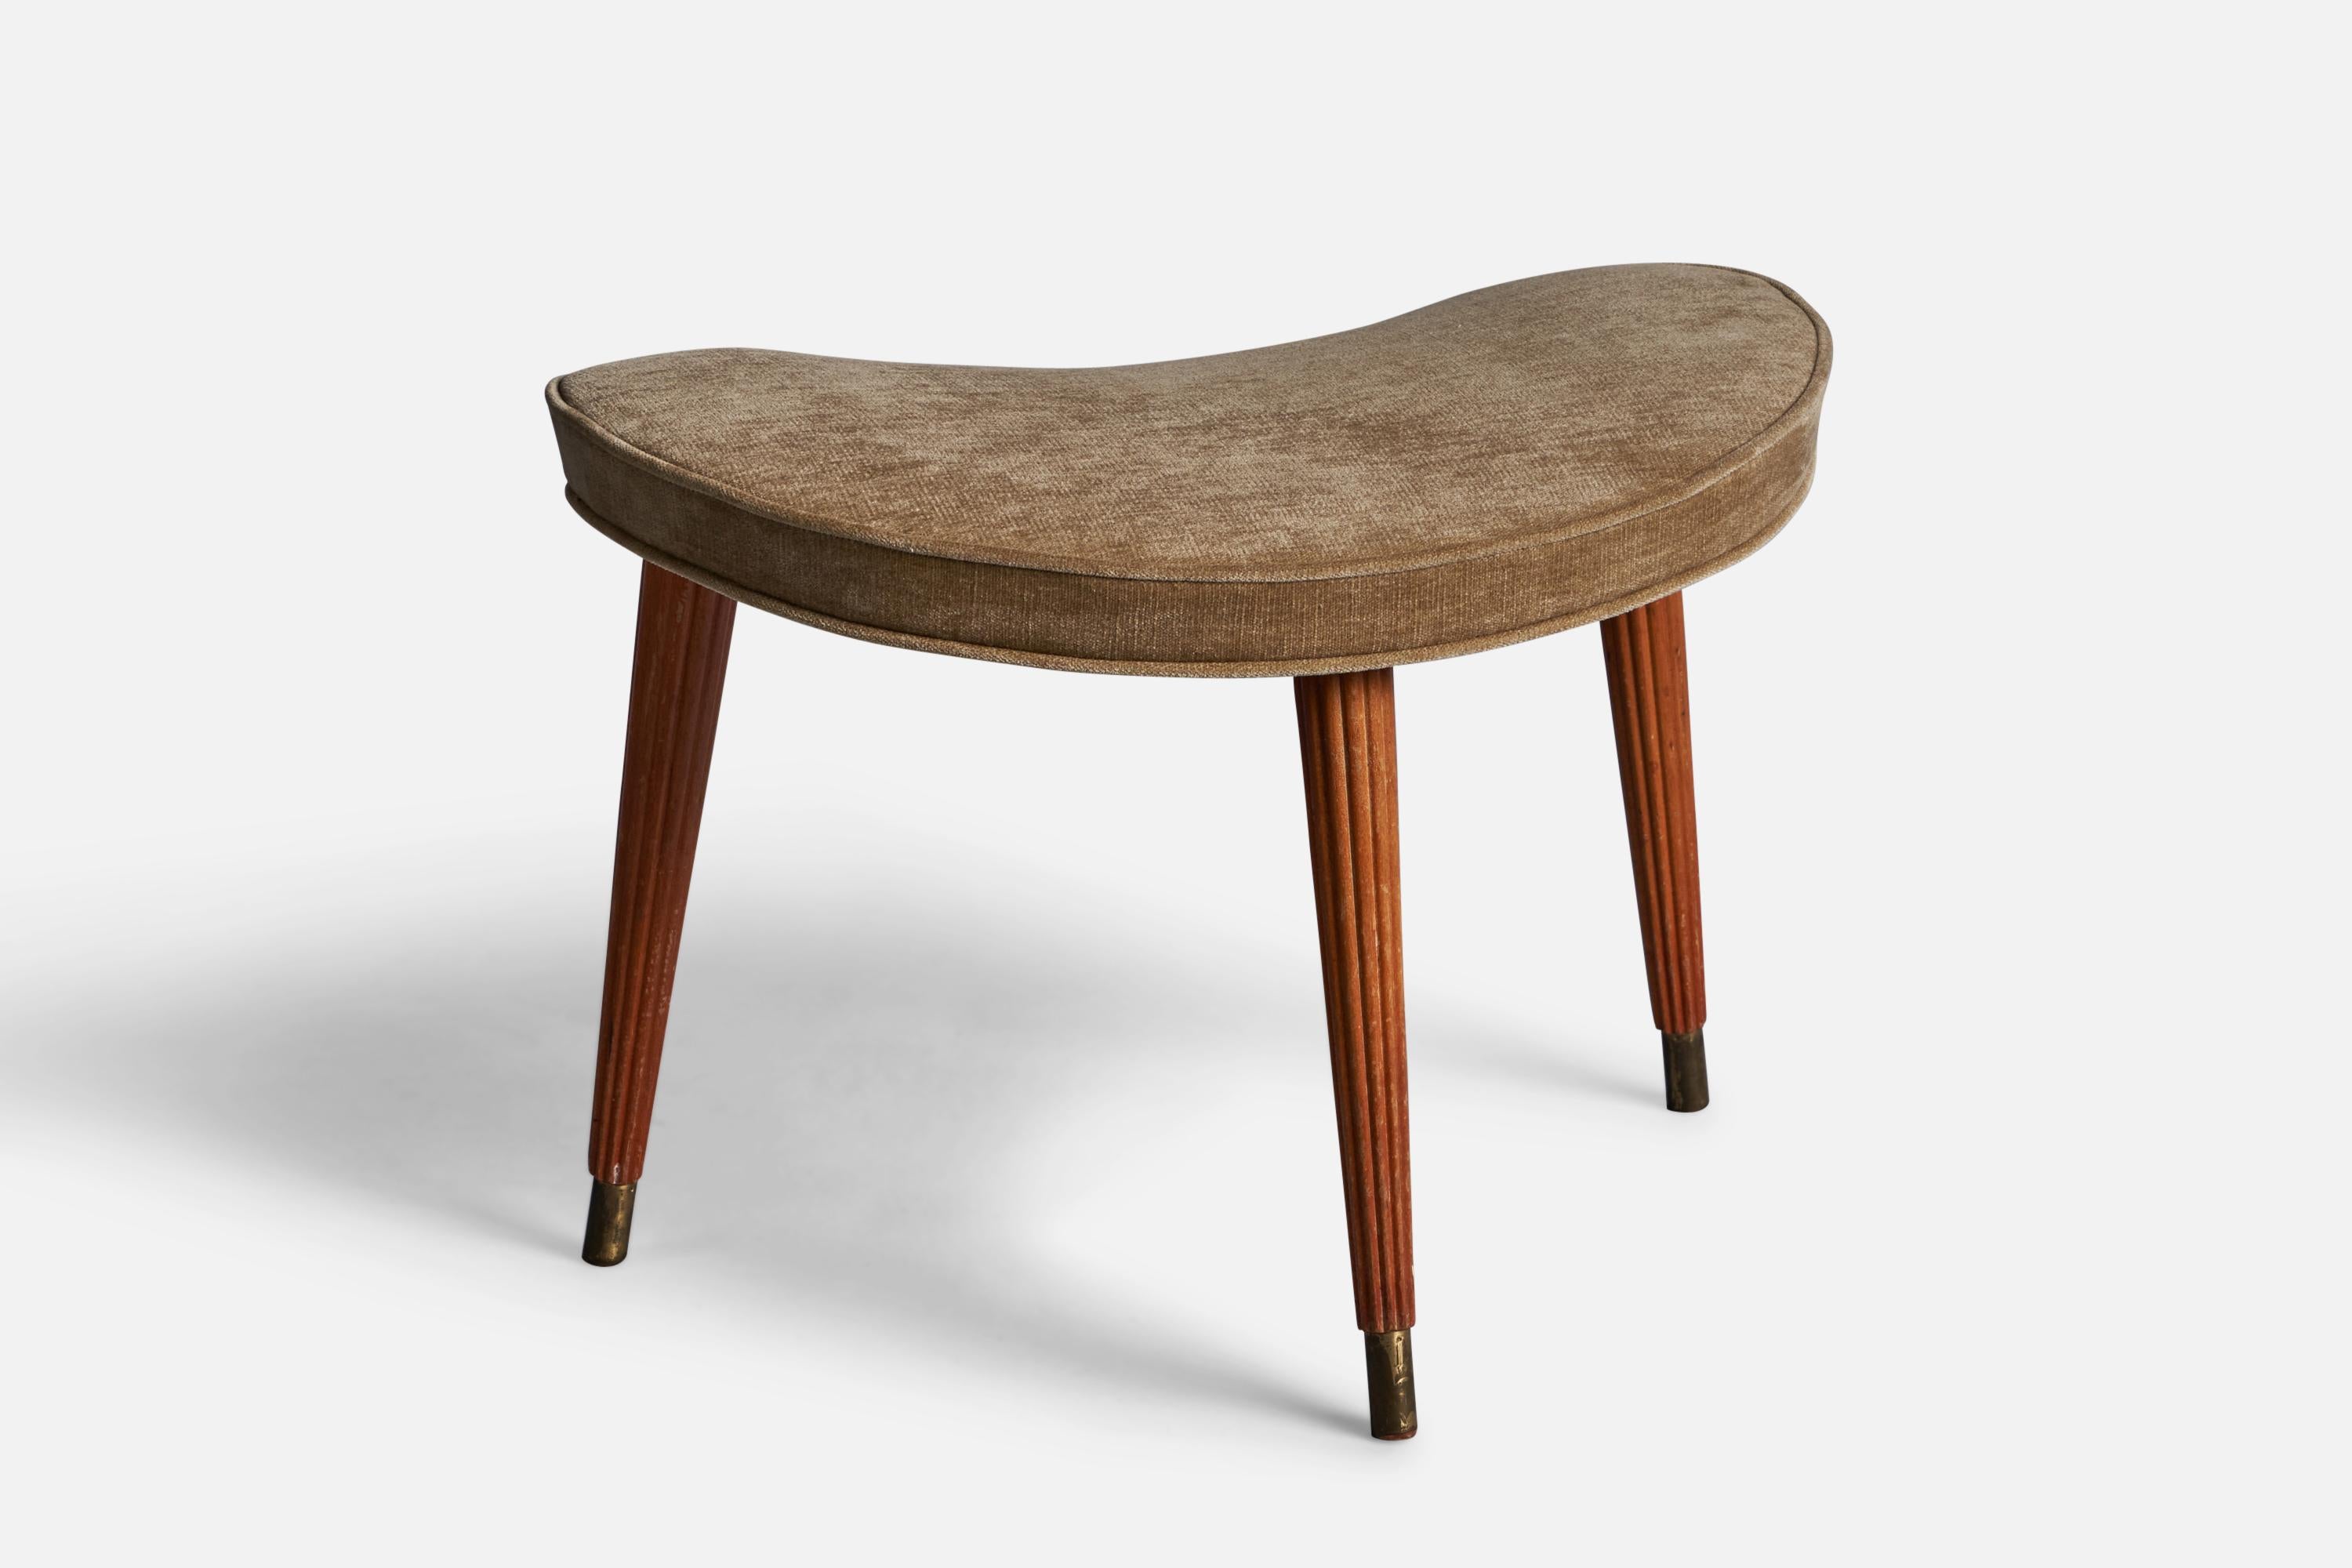 An organic wood, velvet and brass stool, designed and produced in Sweden, 1940s.